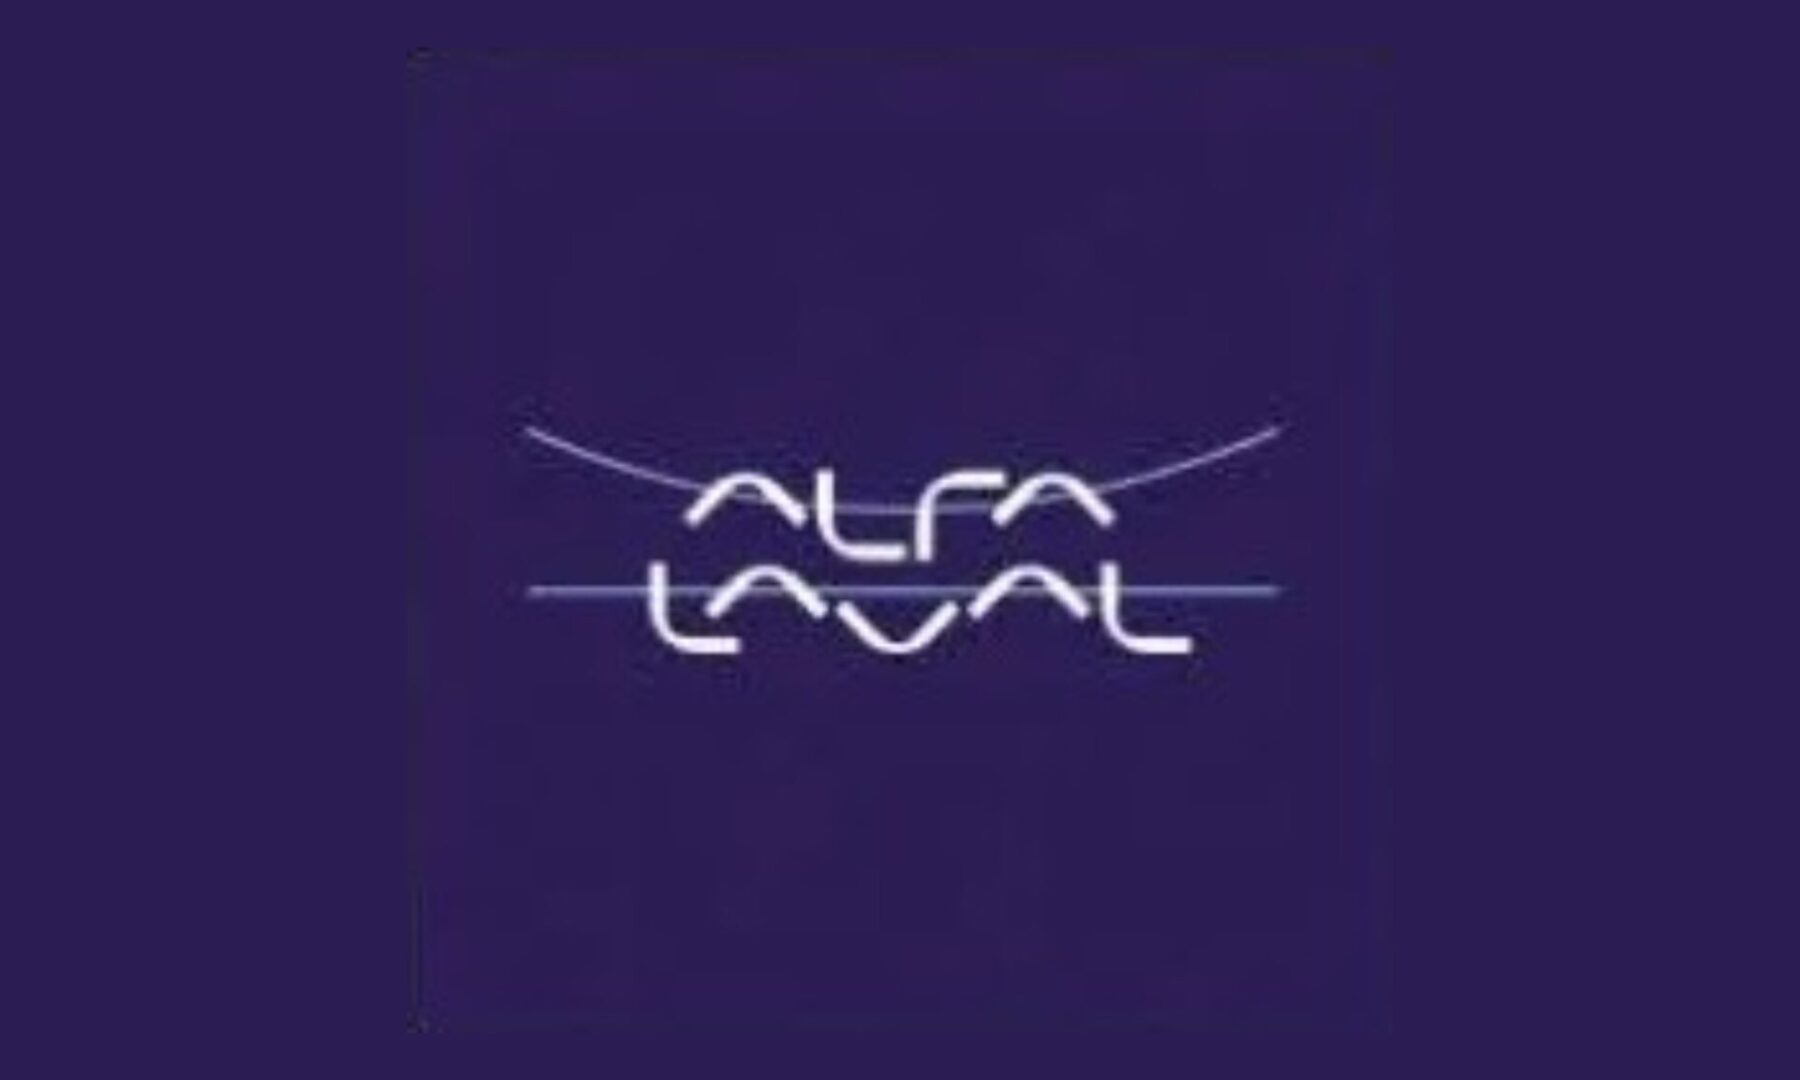 A purple background with the word " alfa laval ".